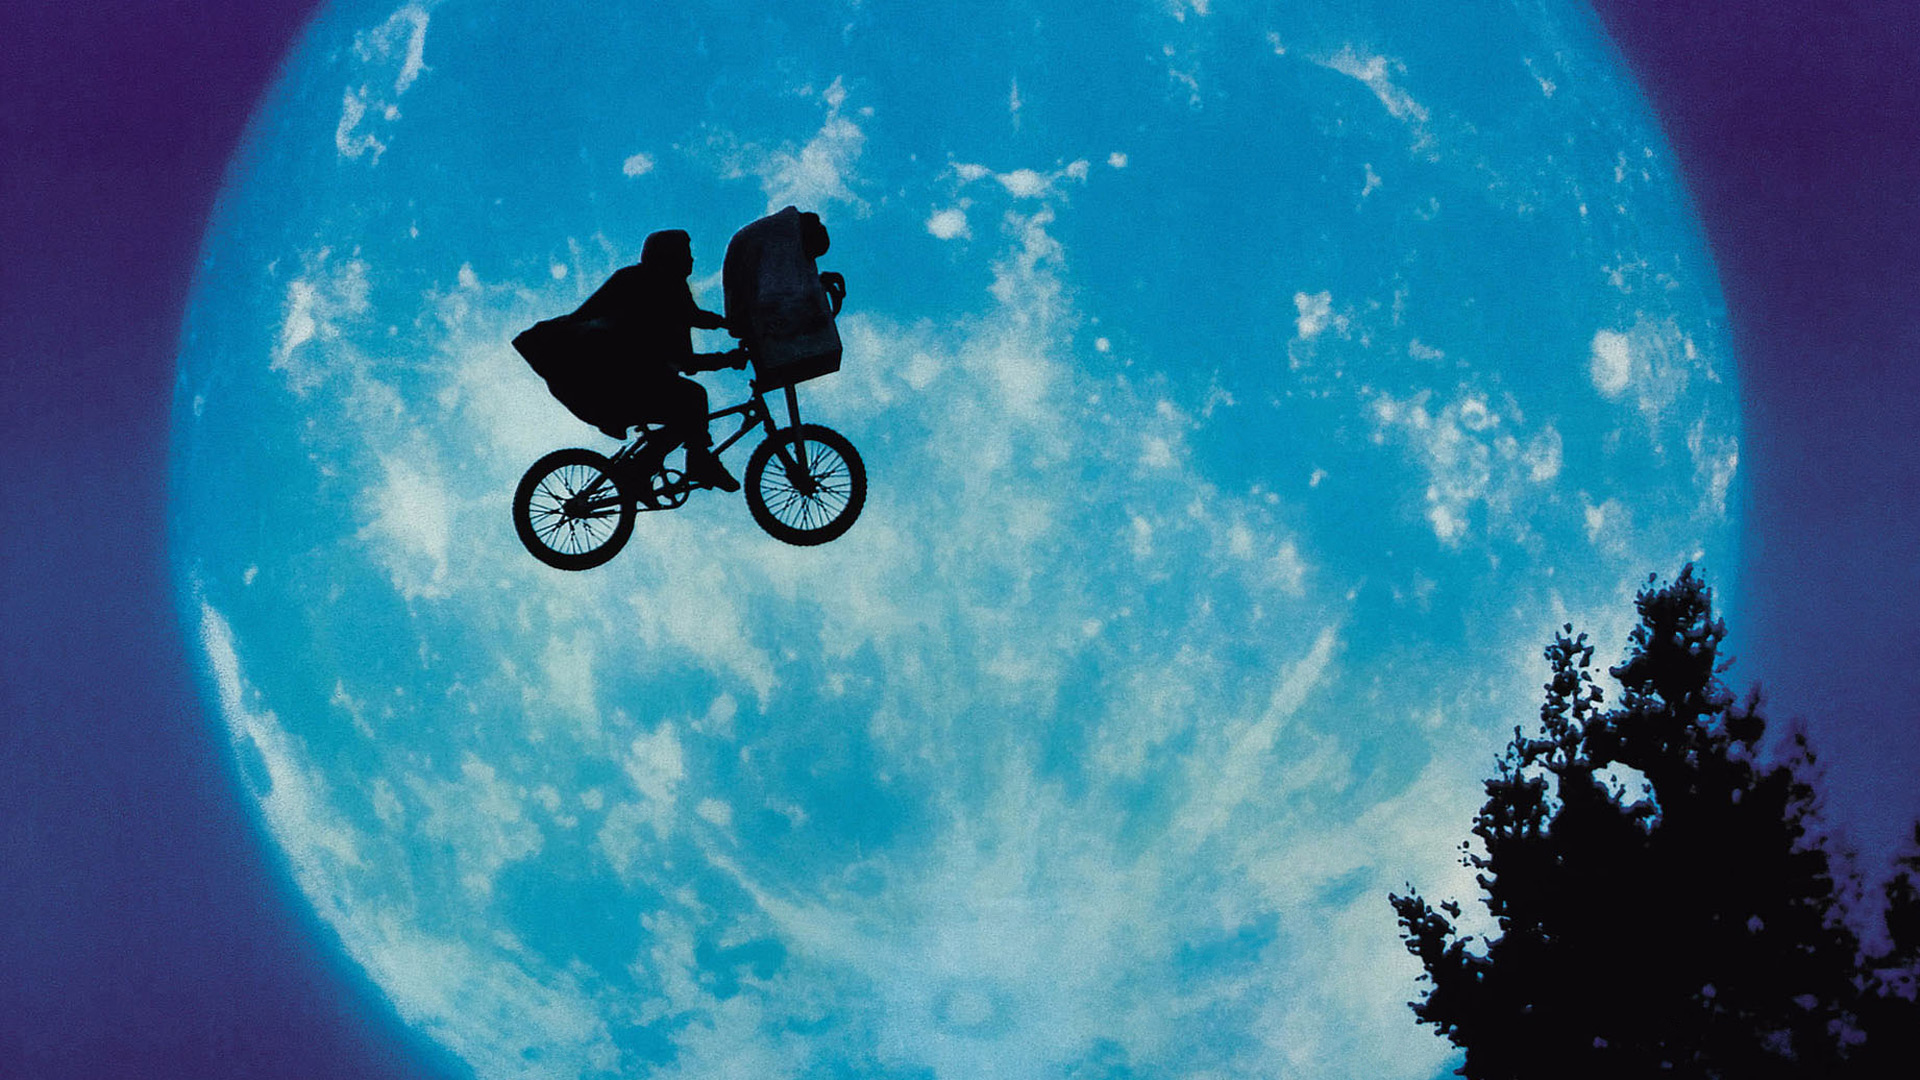 High Resolution Wallpaper | E.T. The Extra-Terrestrial 1920x1080 px